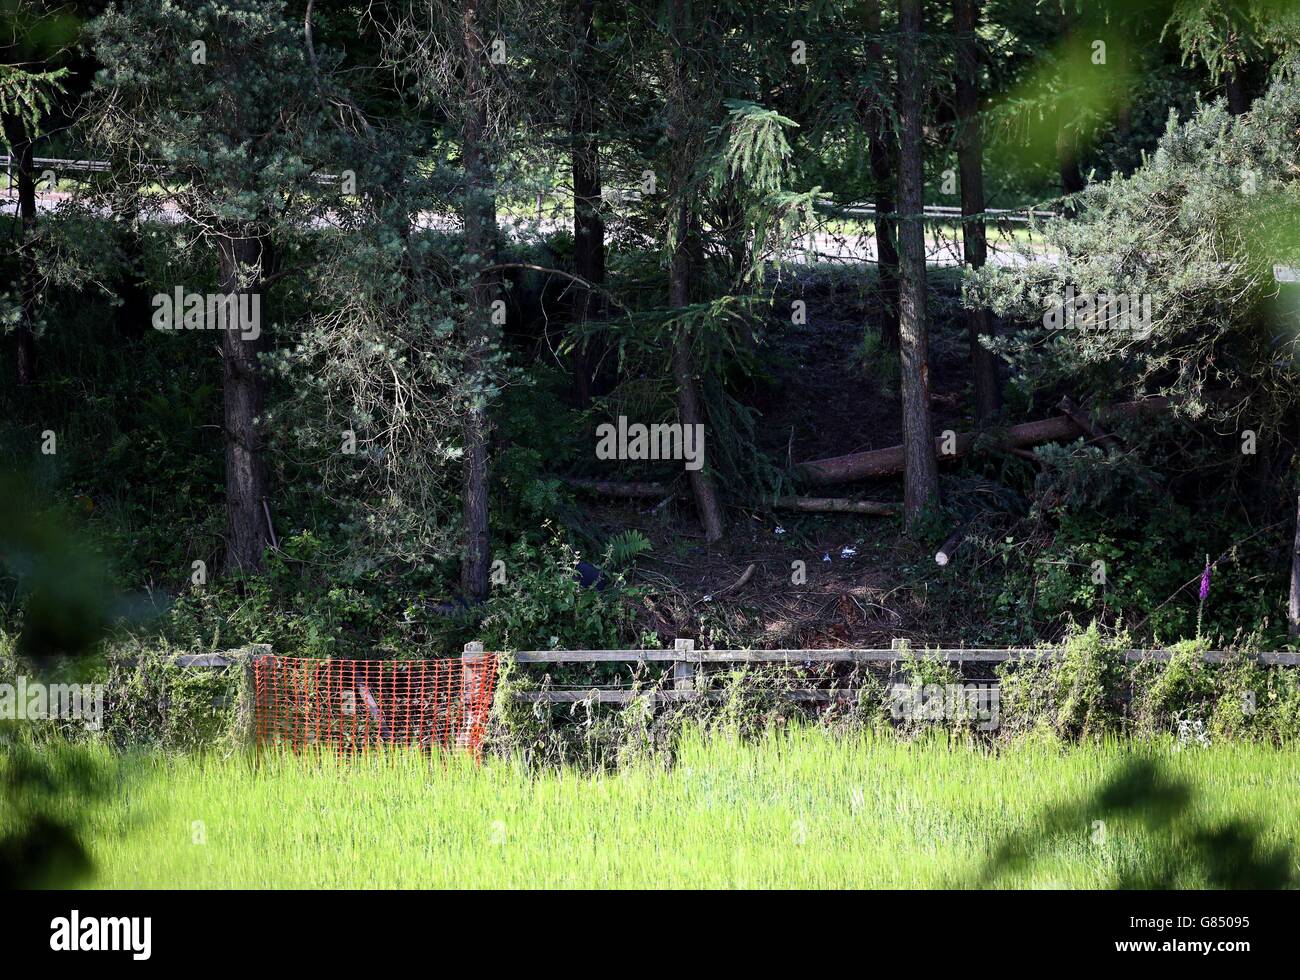 The scene near Junction 9 of the M9 near Stirling where a car left the motorway (seen beyond the trees) and was only discovered three days after police were told that it had crashed. Stock Photo